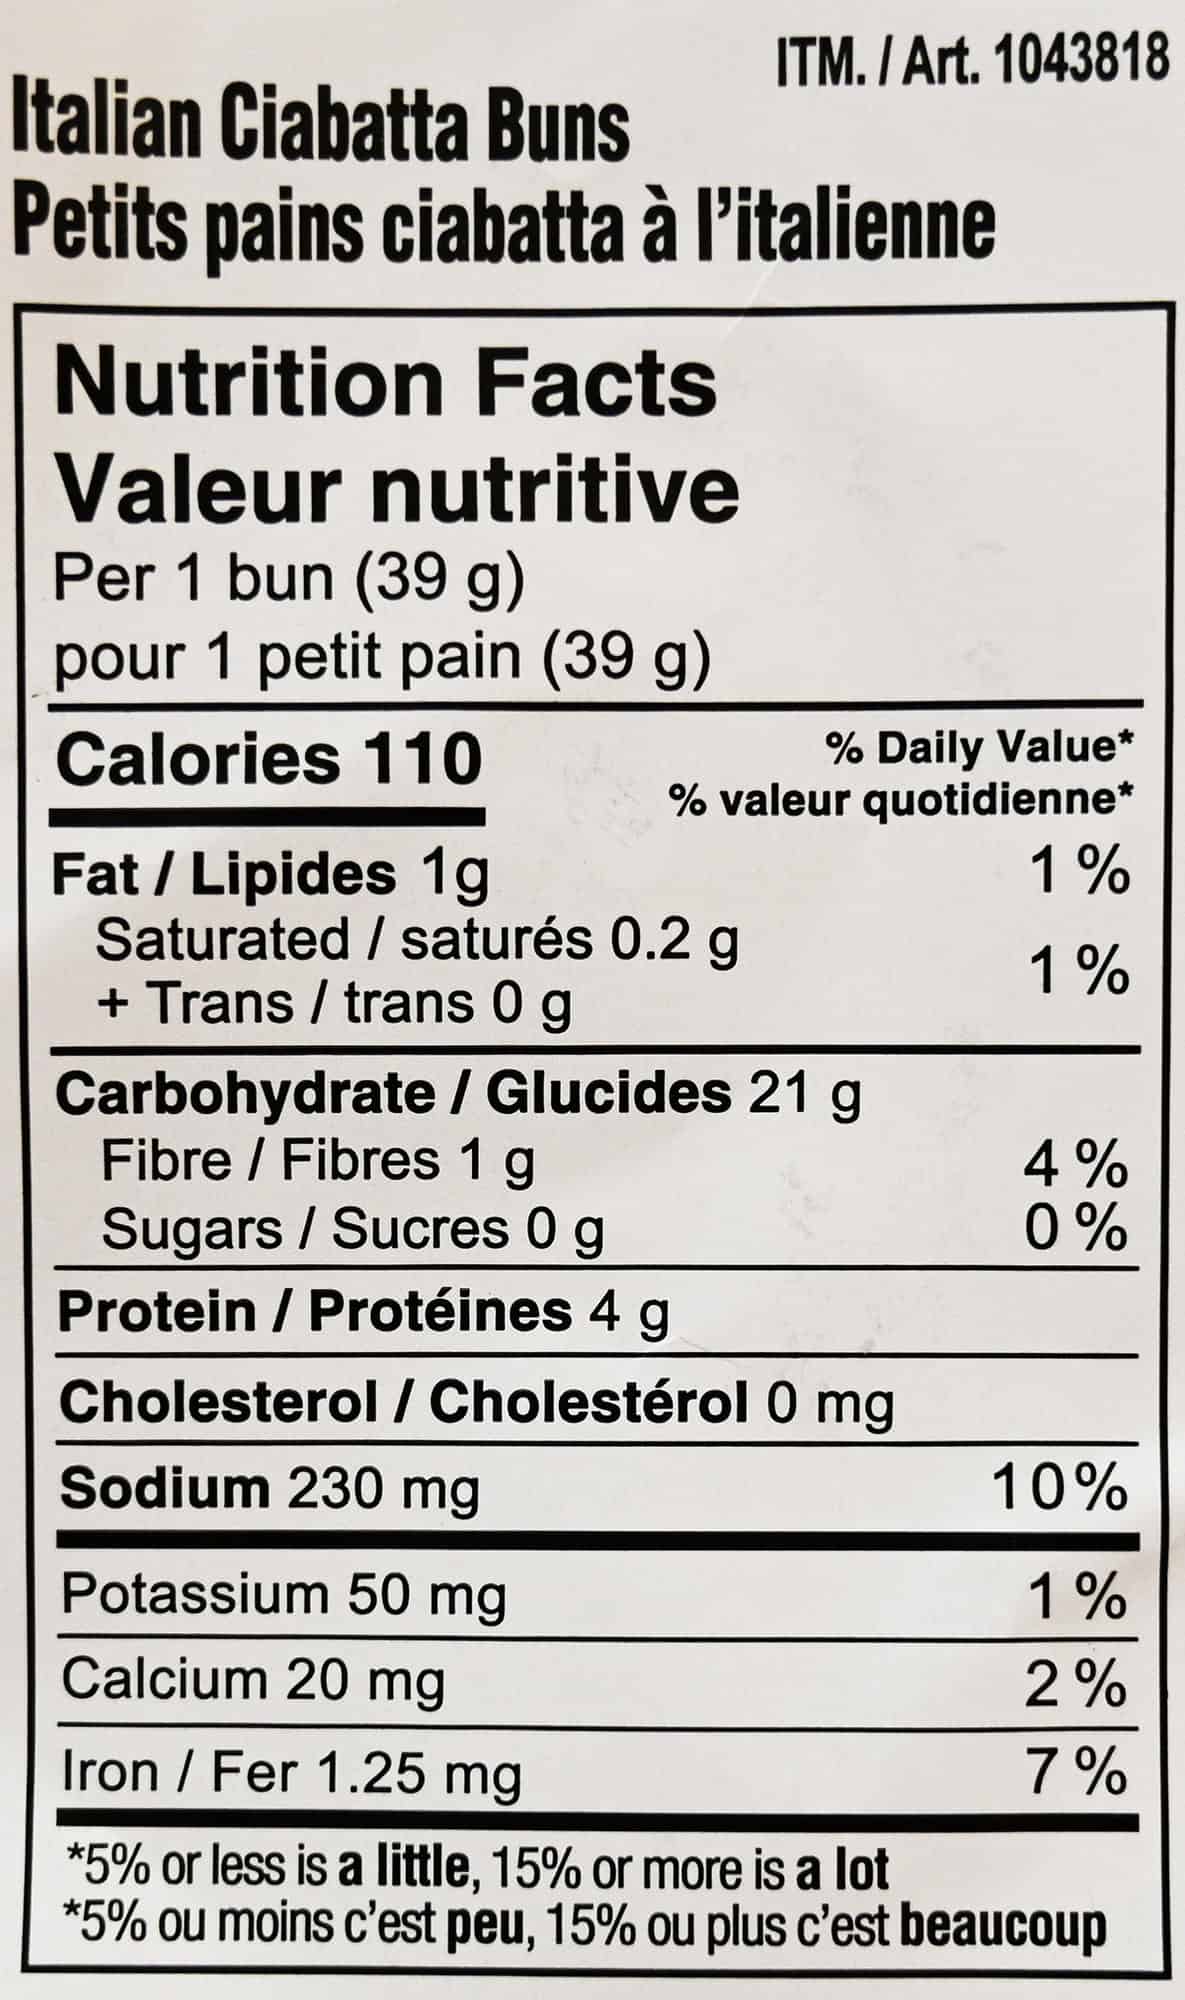 Image of the Italian ciabatta buns nutrition facts label from the bag.